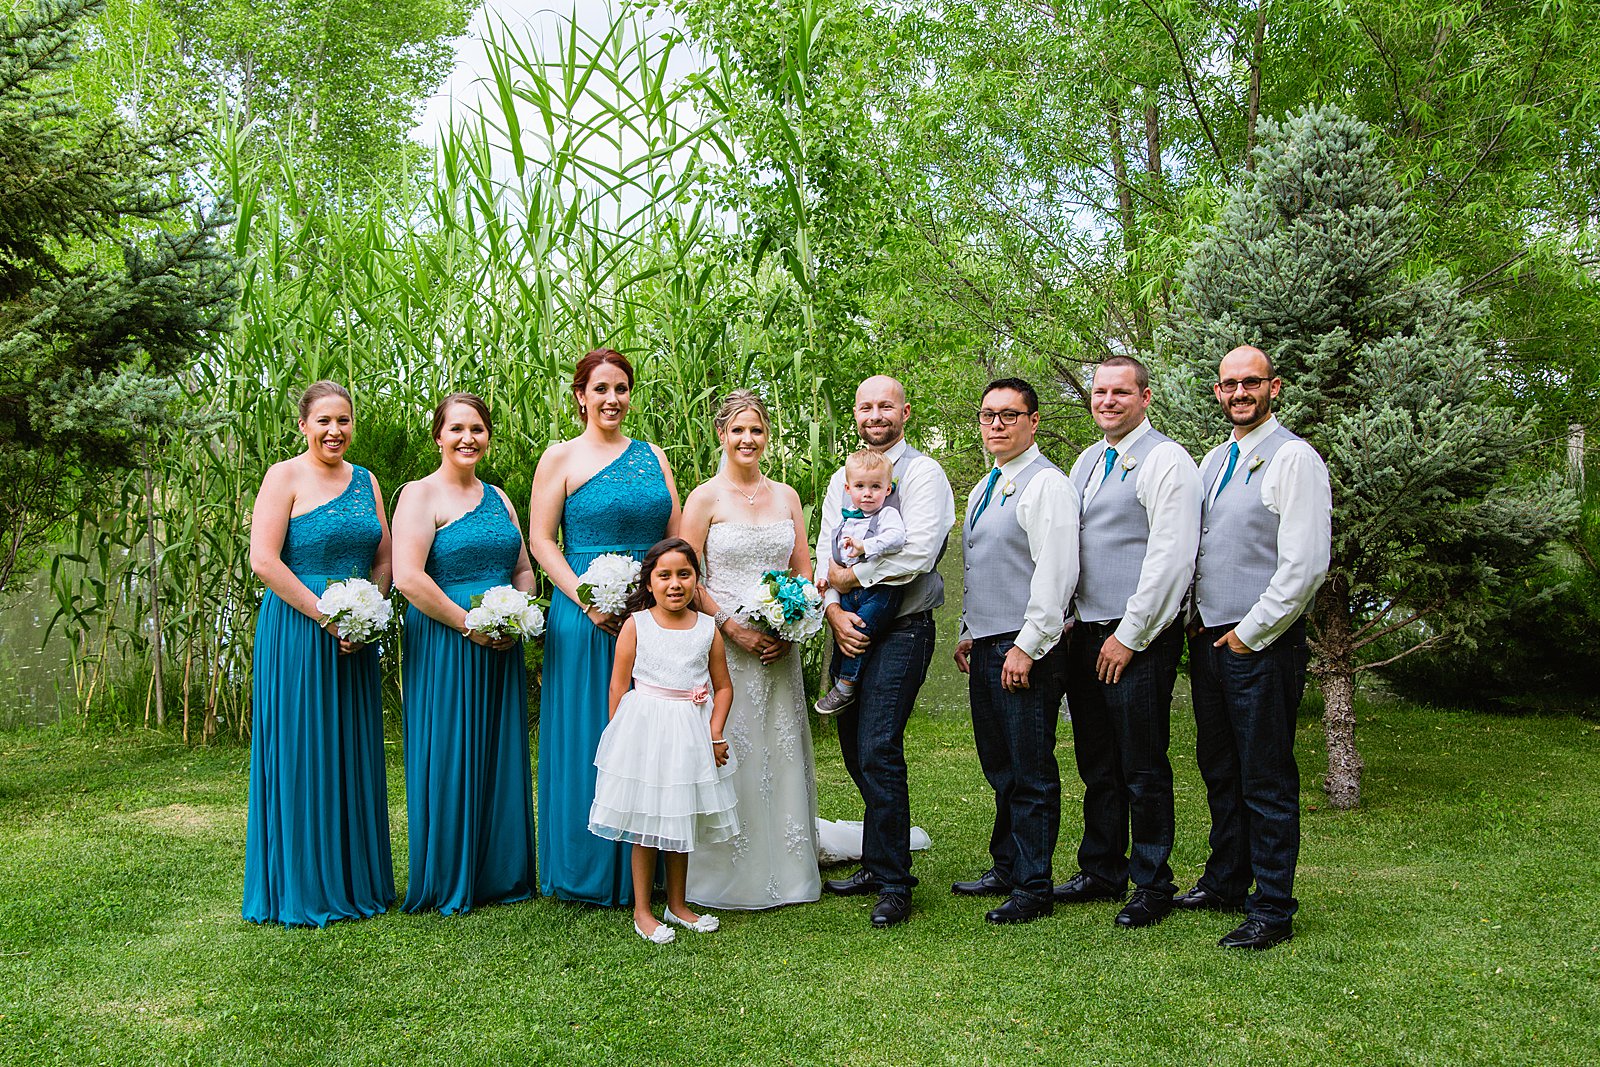 Bridal party together at a The Windmill House wedding by Arizona wedding photographer PMA Photography.